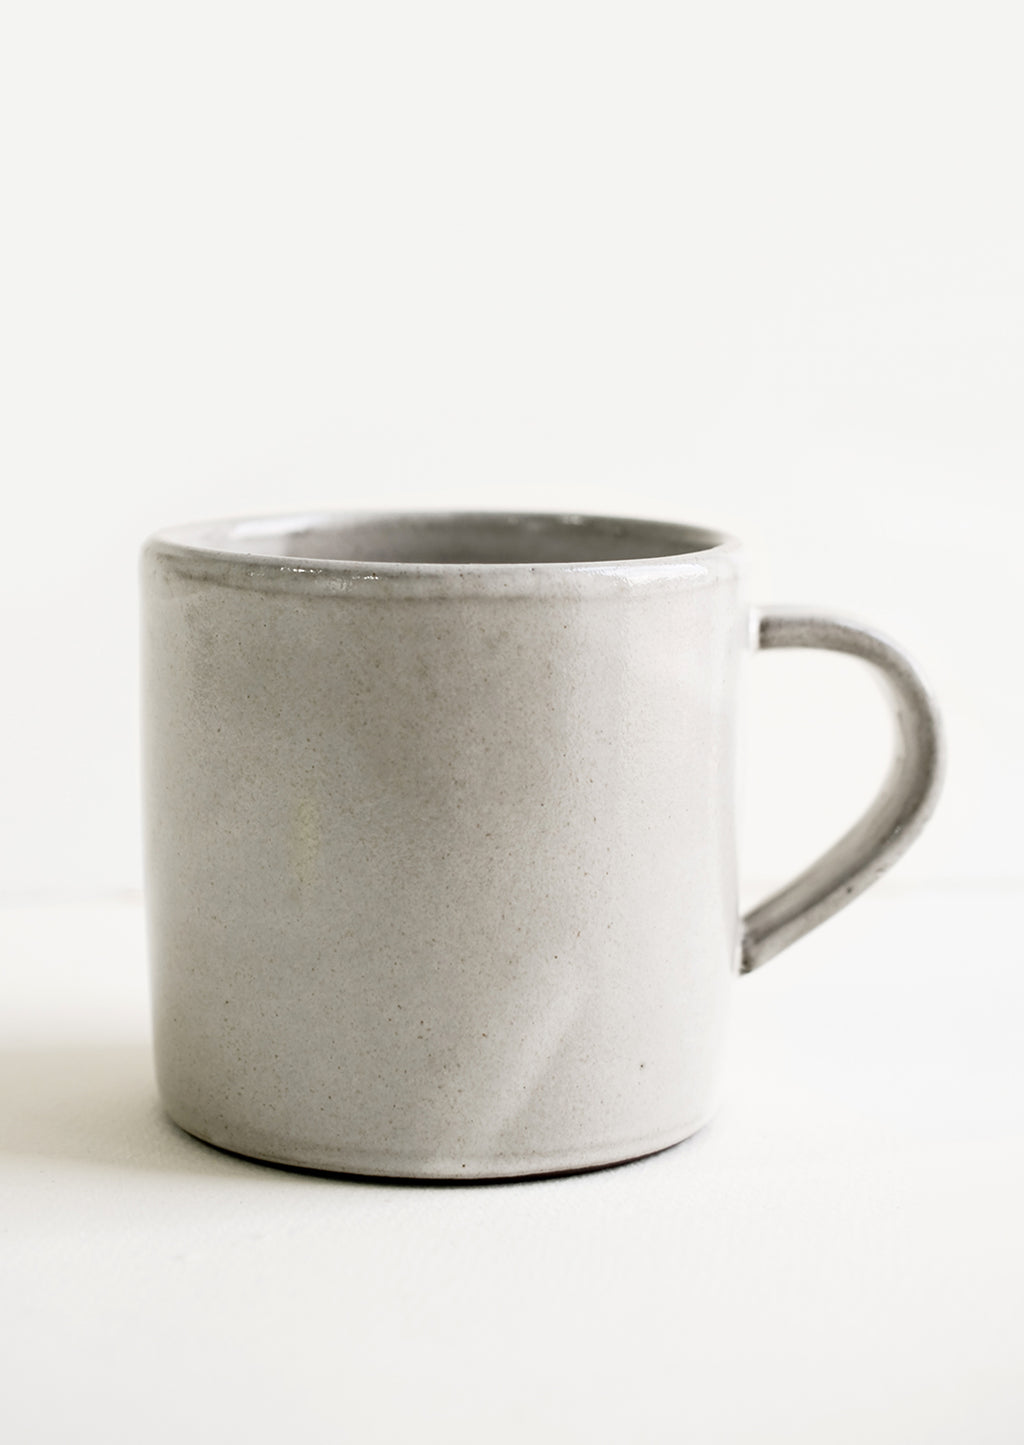 2: A ceramic coffee mug in a simple, classic shape in a white glaze over brown clay.